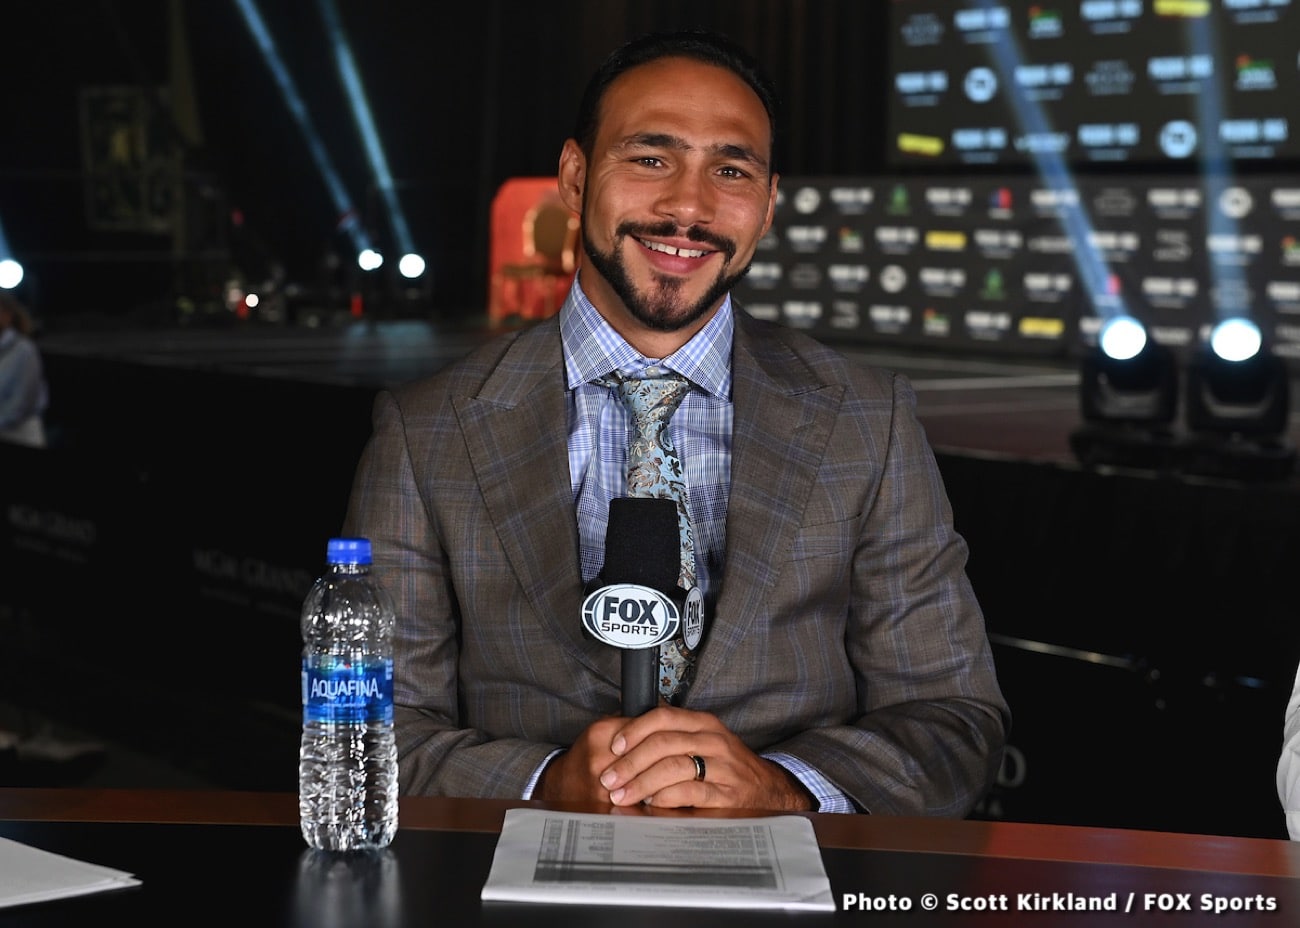 Image: Keith Thurman: Ugas is a bad style for Pacquiao